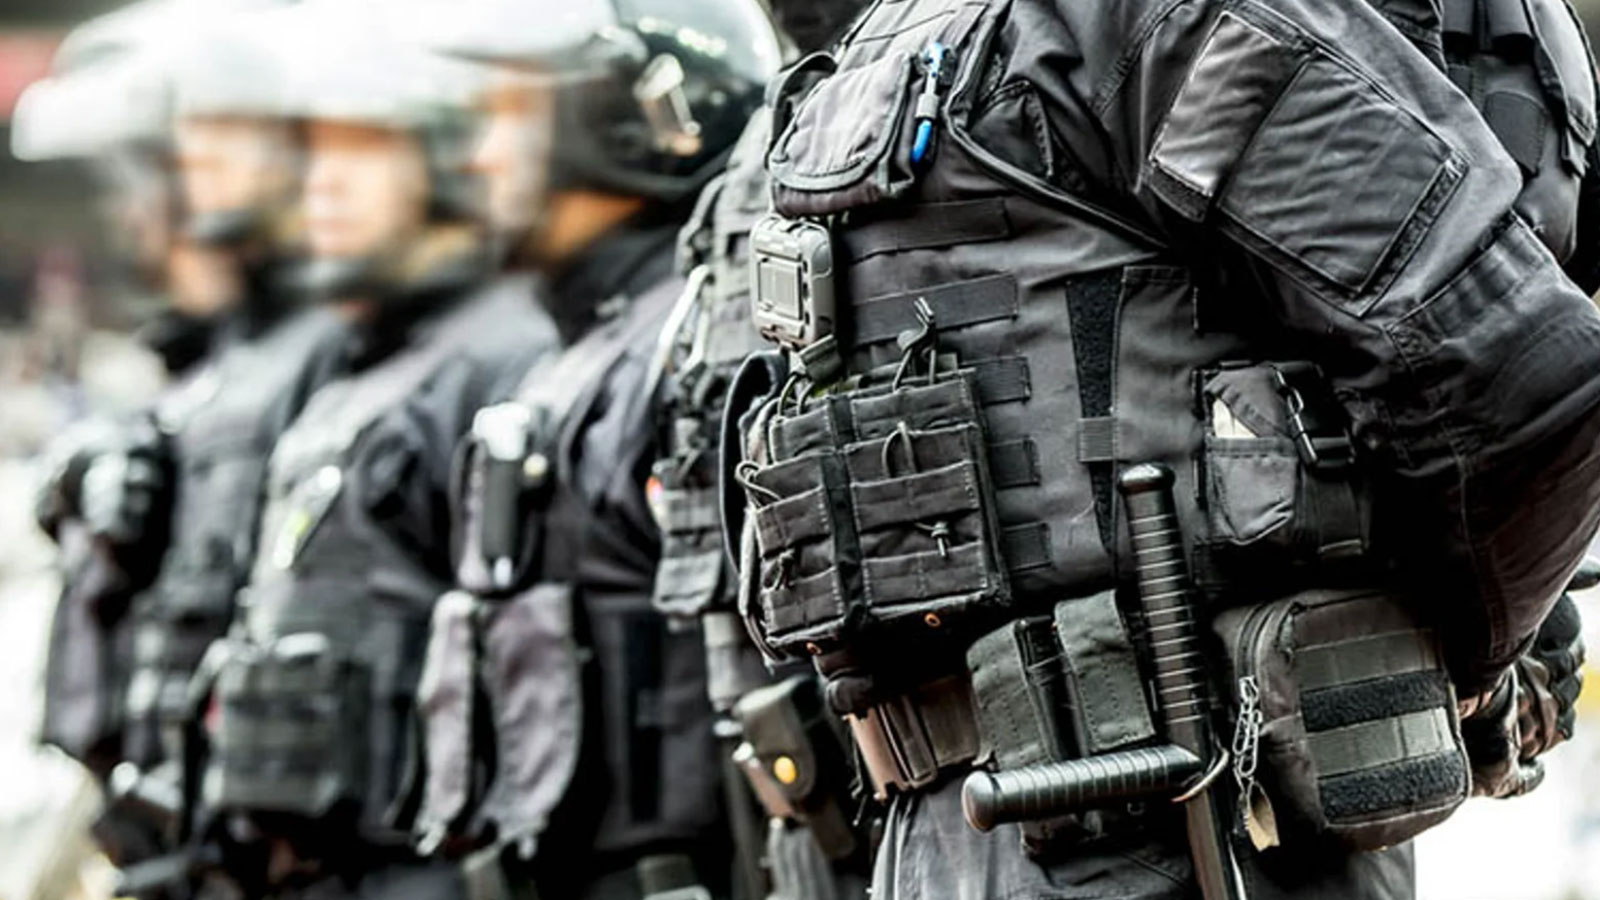 Cops act as occupying armies to maintain the white-power status quo